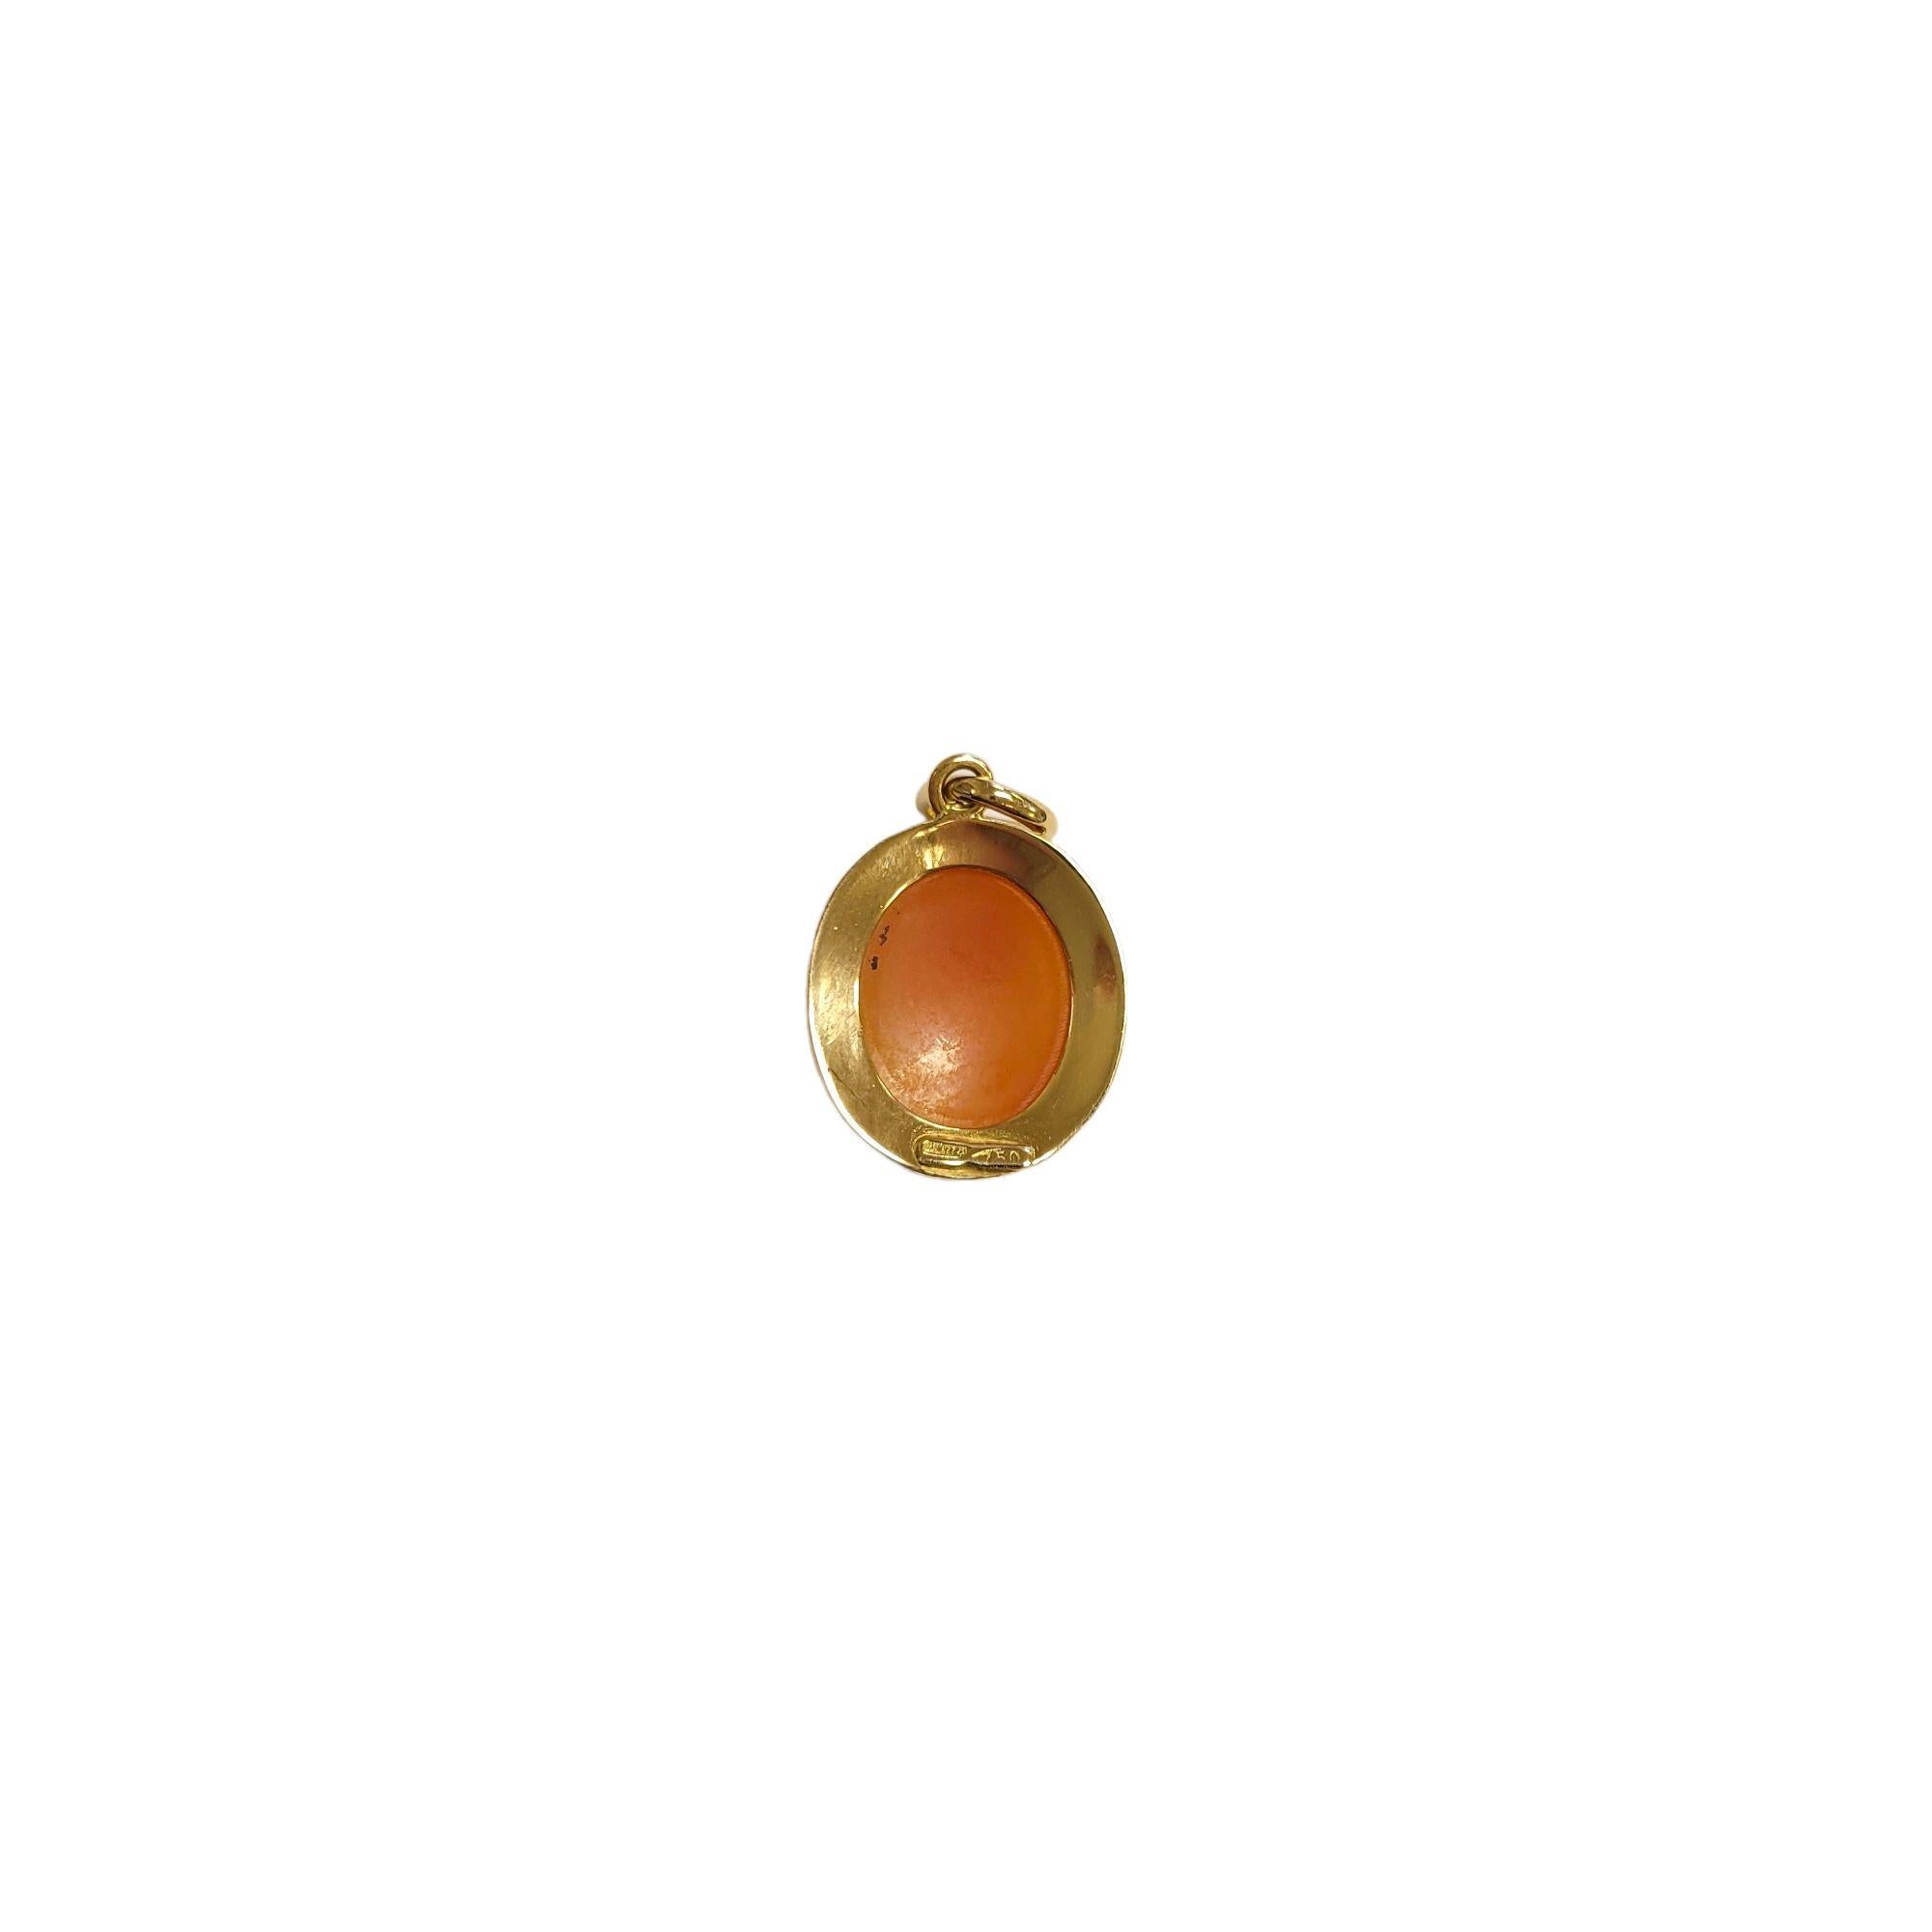 Beautiful 18K yellow gold cameo pendant!

Size: 7mm X 13.5mm X 5.5mm

Length w/ bail: 24mm

Weight: 1.5 g/ 0.9 dwt

Hallmark: 228 750

Very good condition, professionally polished.

Will come packaged in a gift box or pouch (when possible) and will